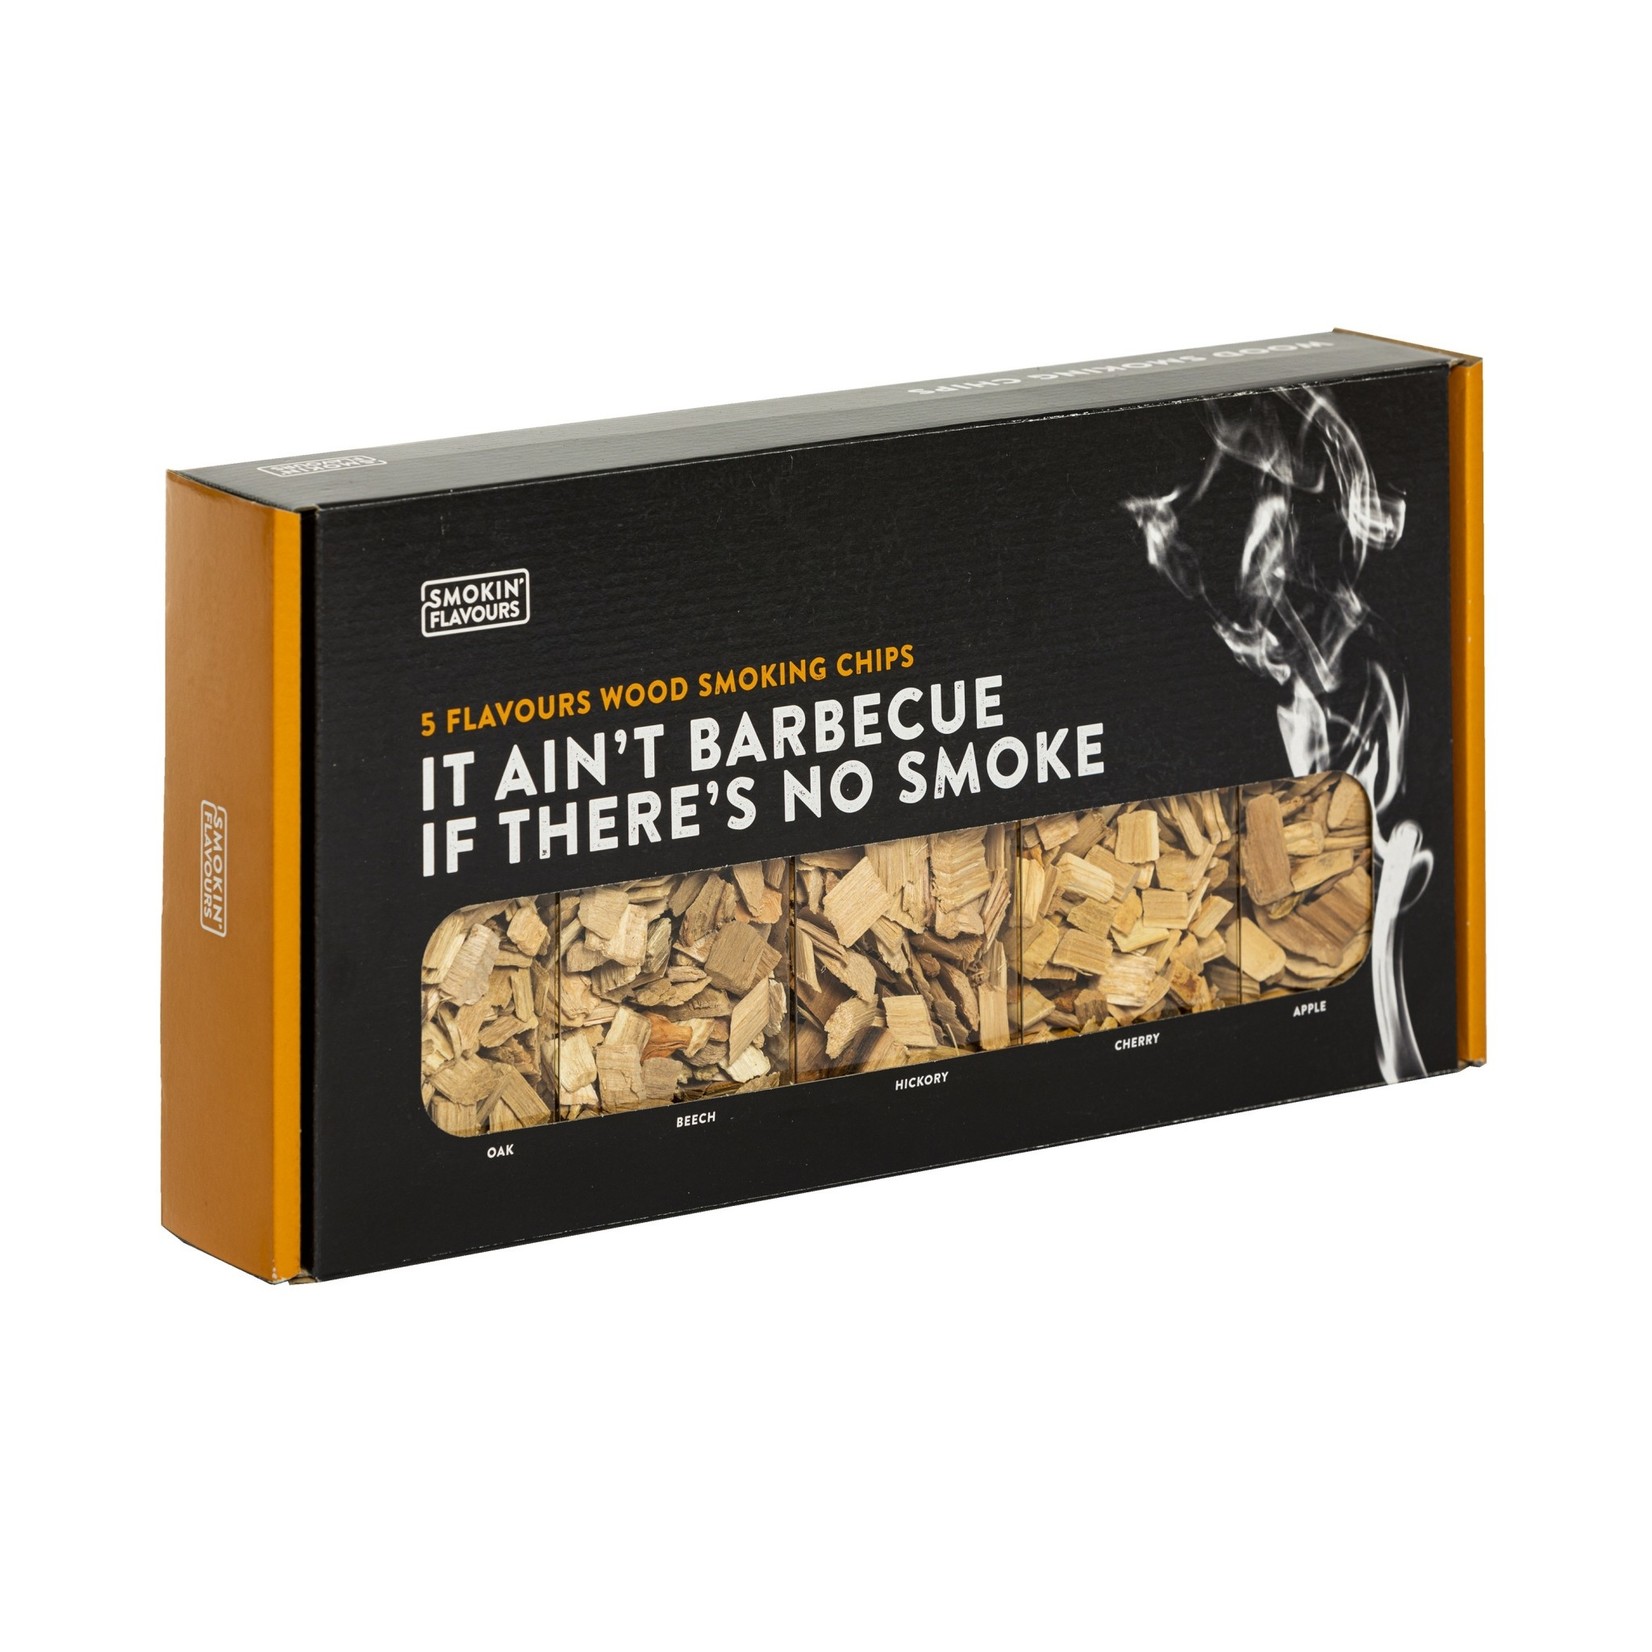 Smokin Flavour Smokin' Flavours Giftbox rooksnippers 5x 650 ml eik - beuk - appel - kers - hickory